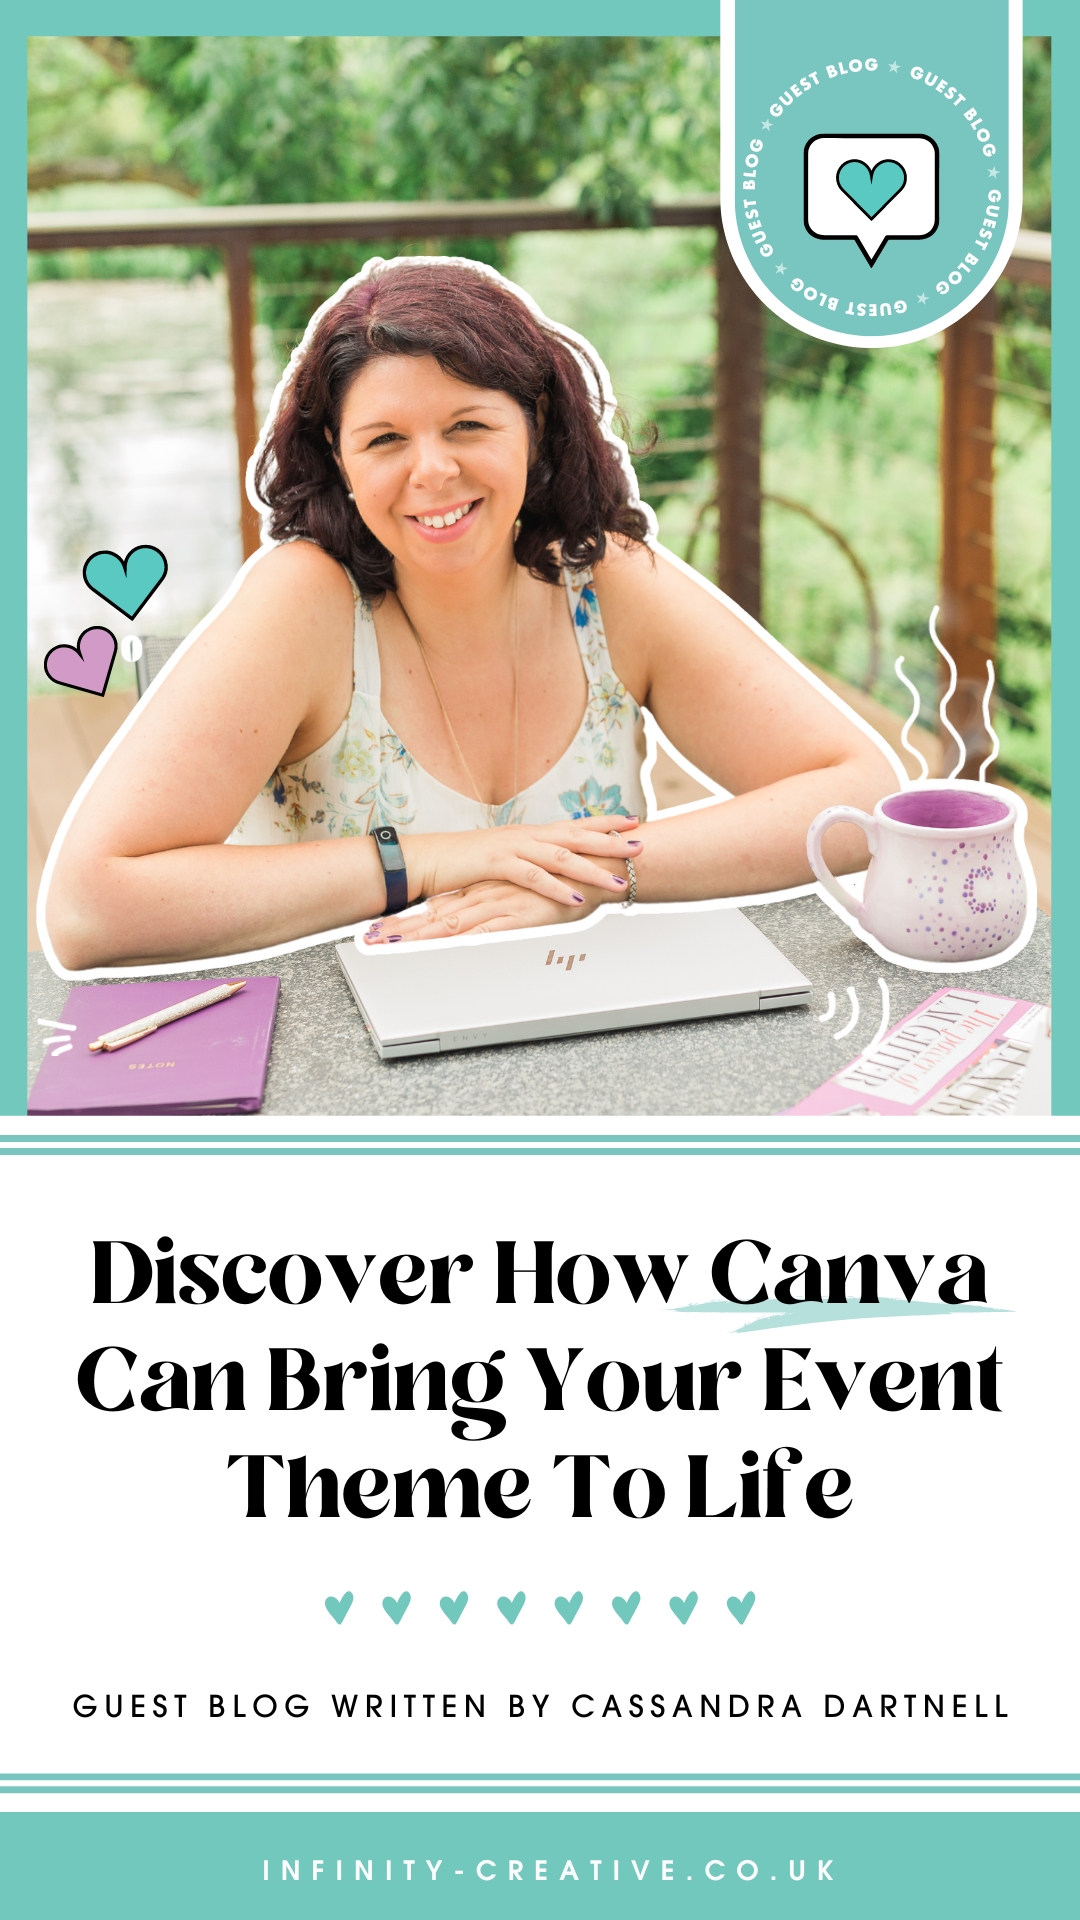 GB Discover How Canva Can Bring Your Event Theme To Life